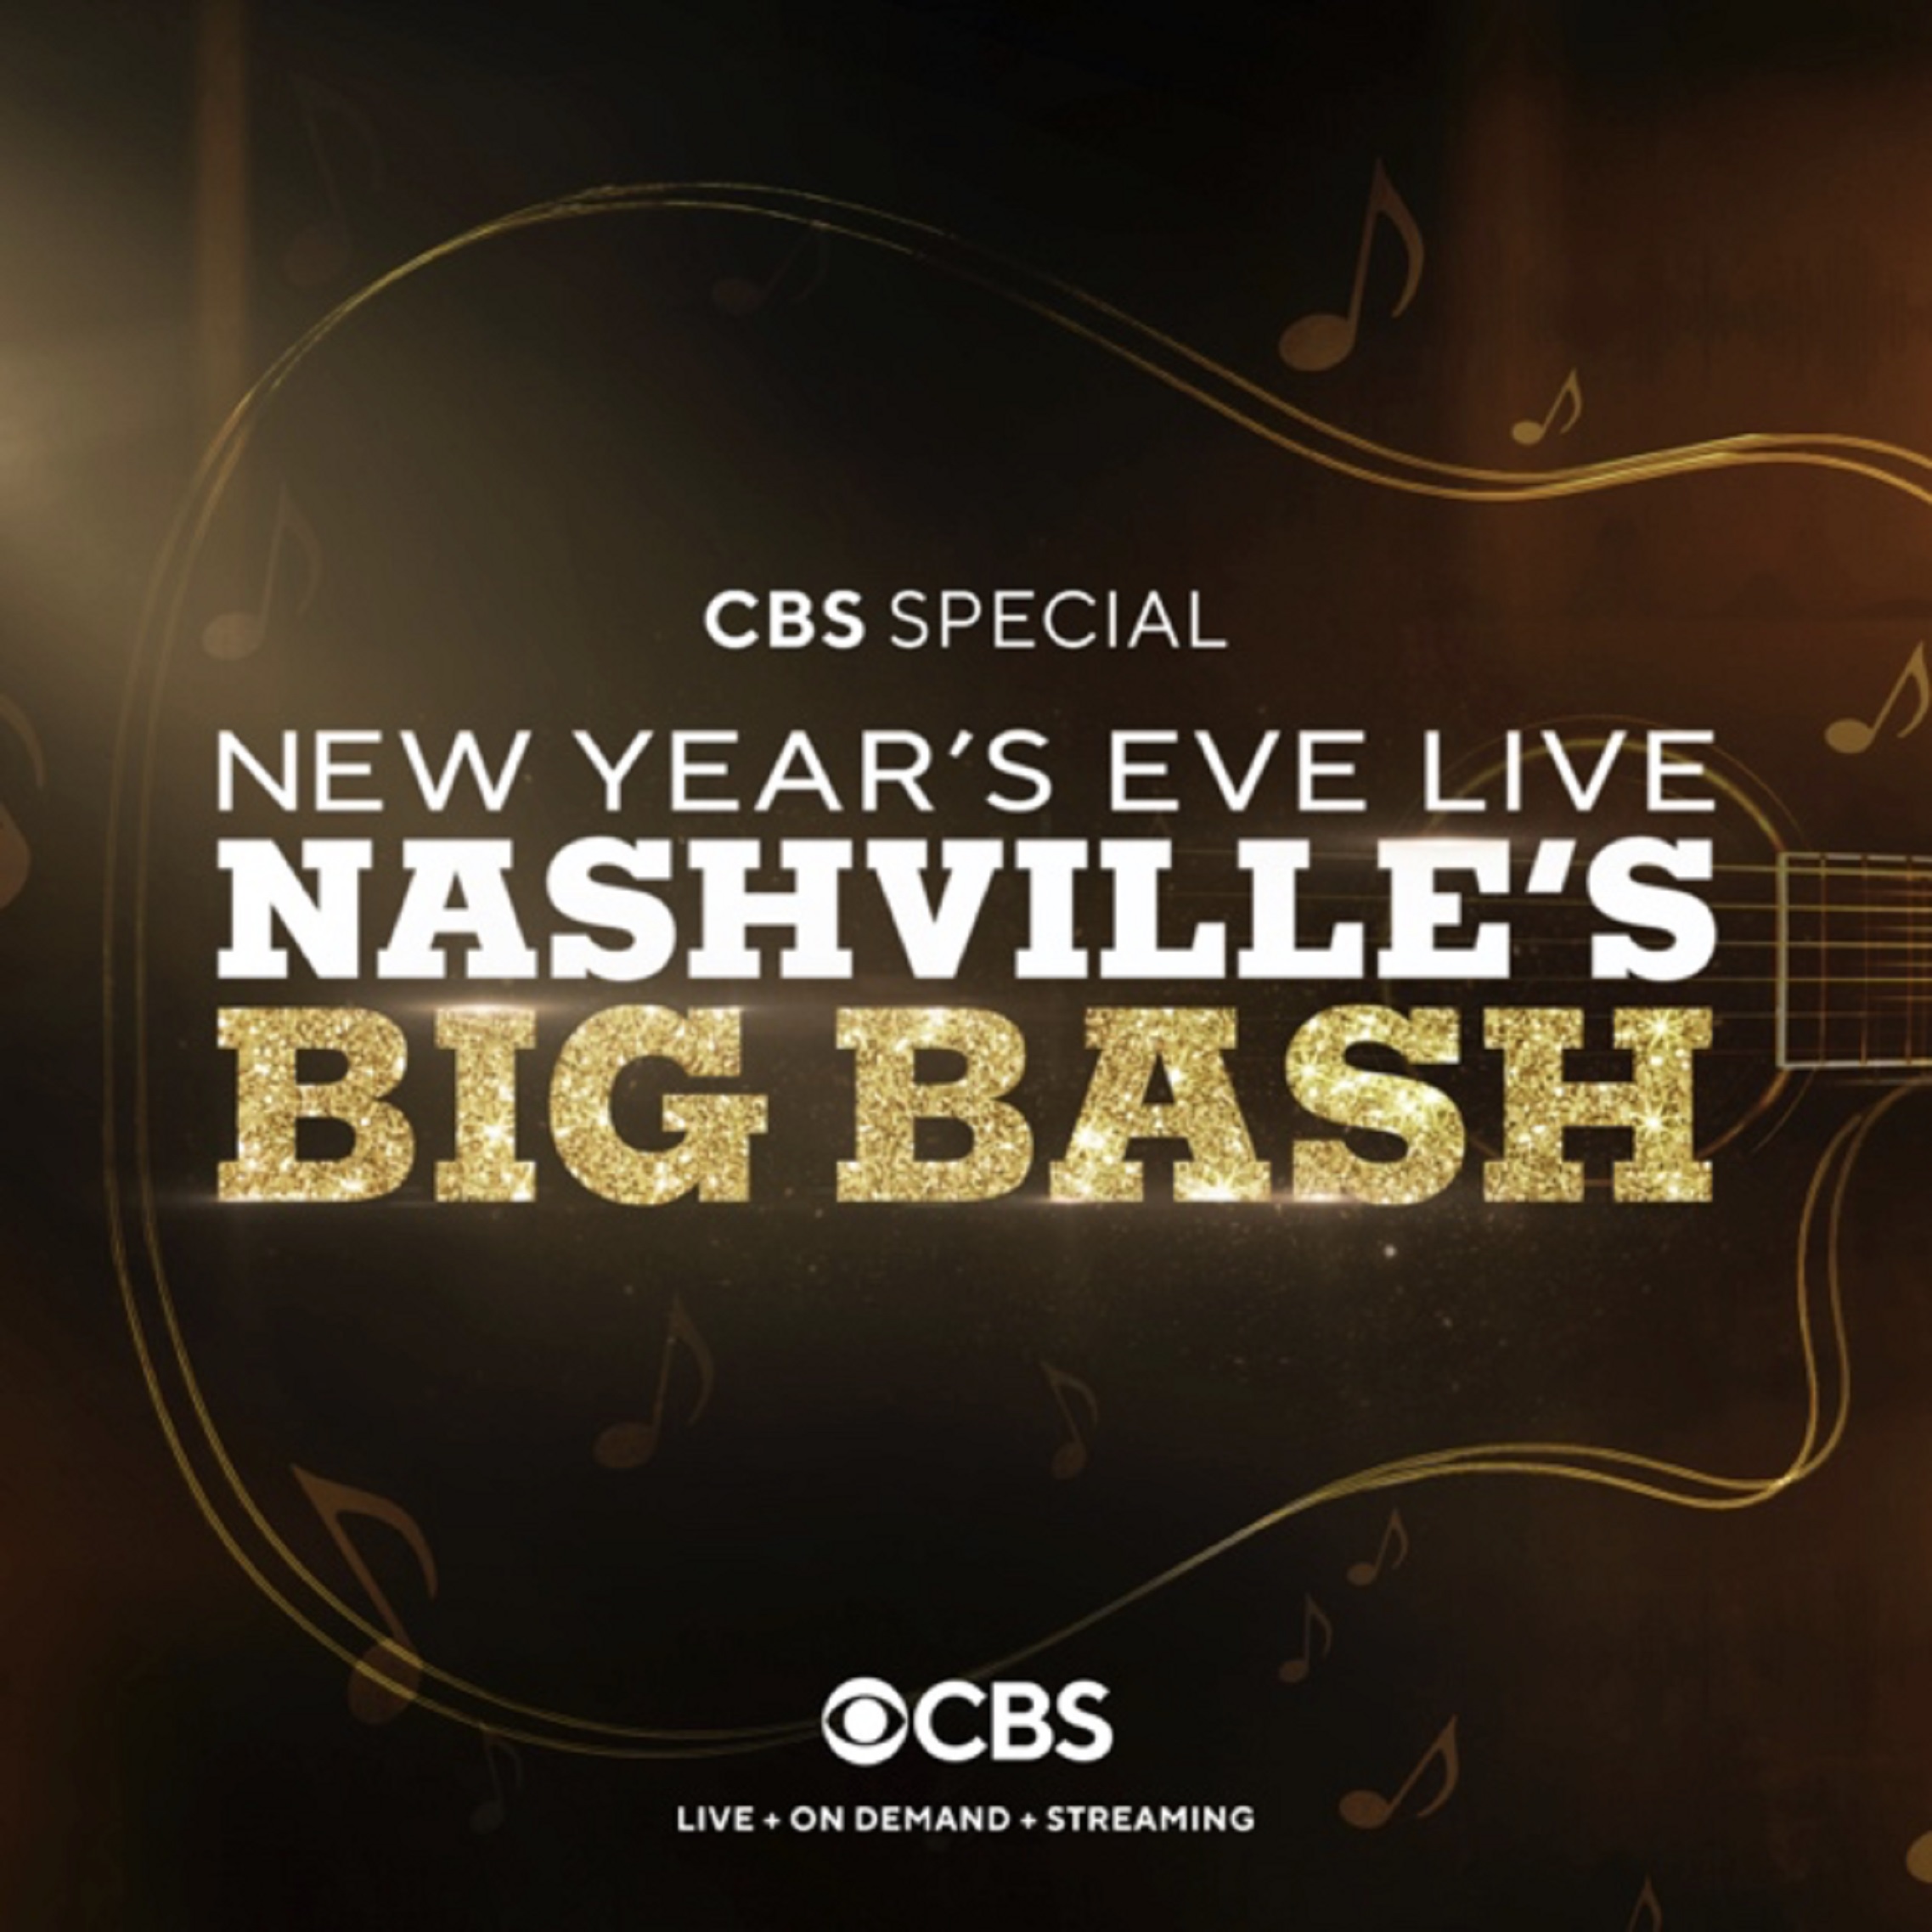 NEW YEAR’S EVE LIVE: NASHVILLE’S BIG BASH Announces More Performers